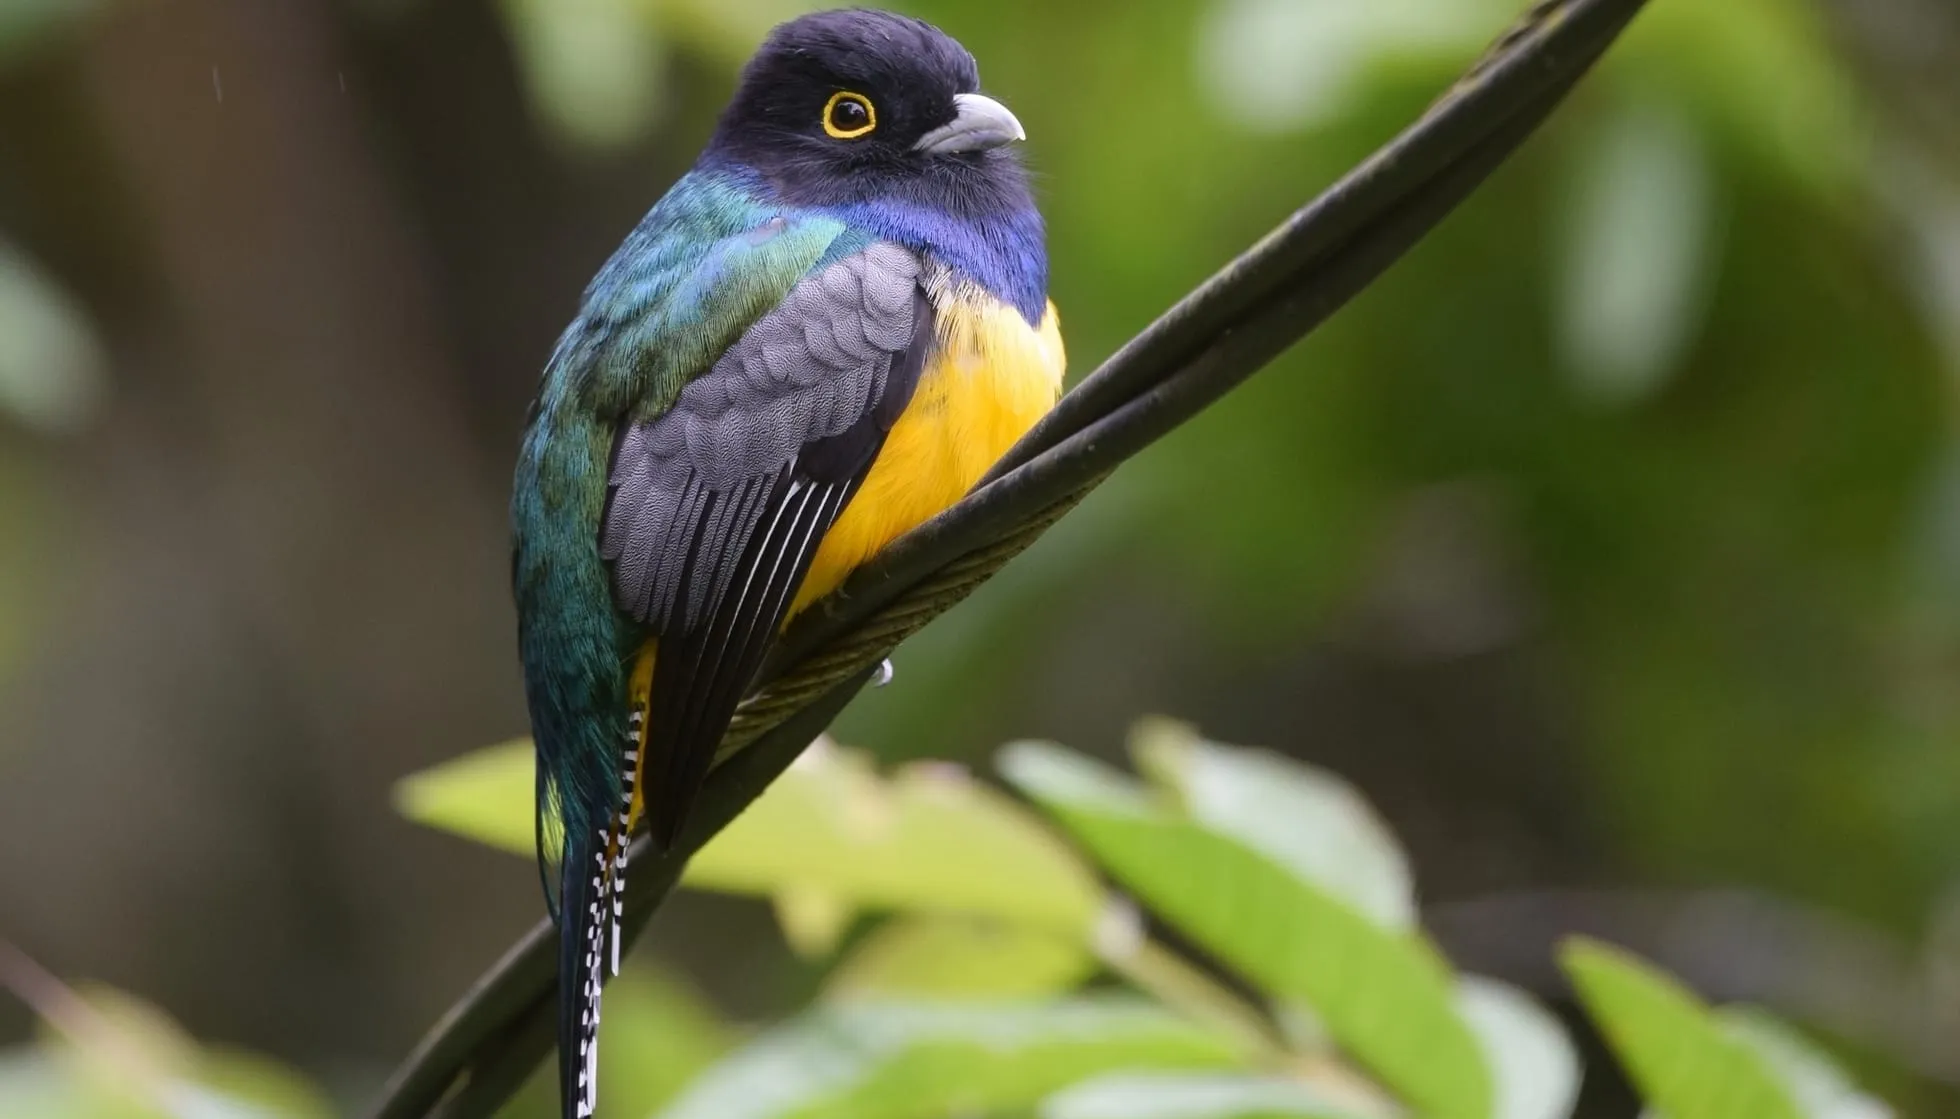 Gartered Trogon (Trogon caligatus) perched on a twisted wire